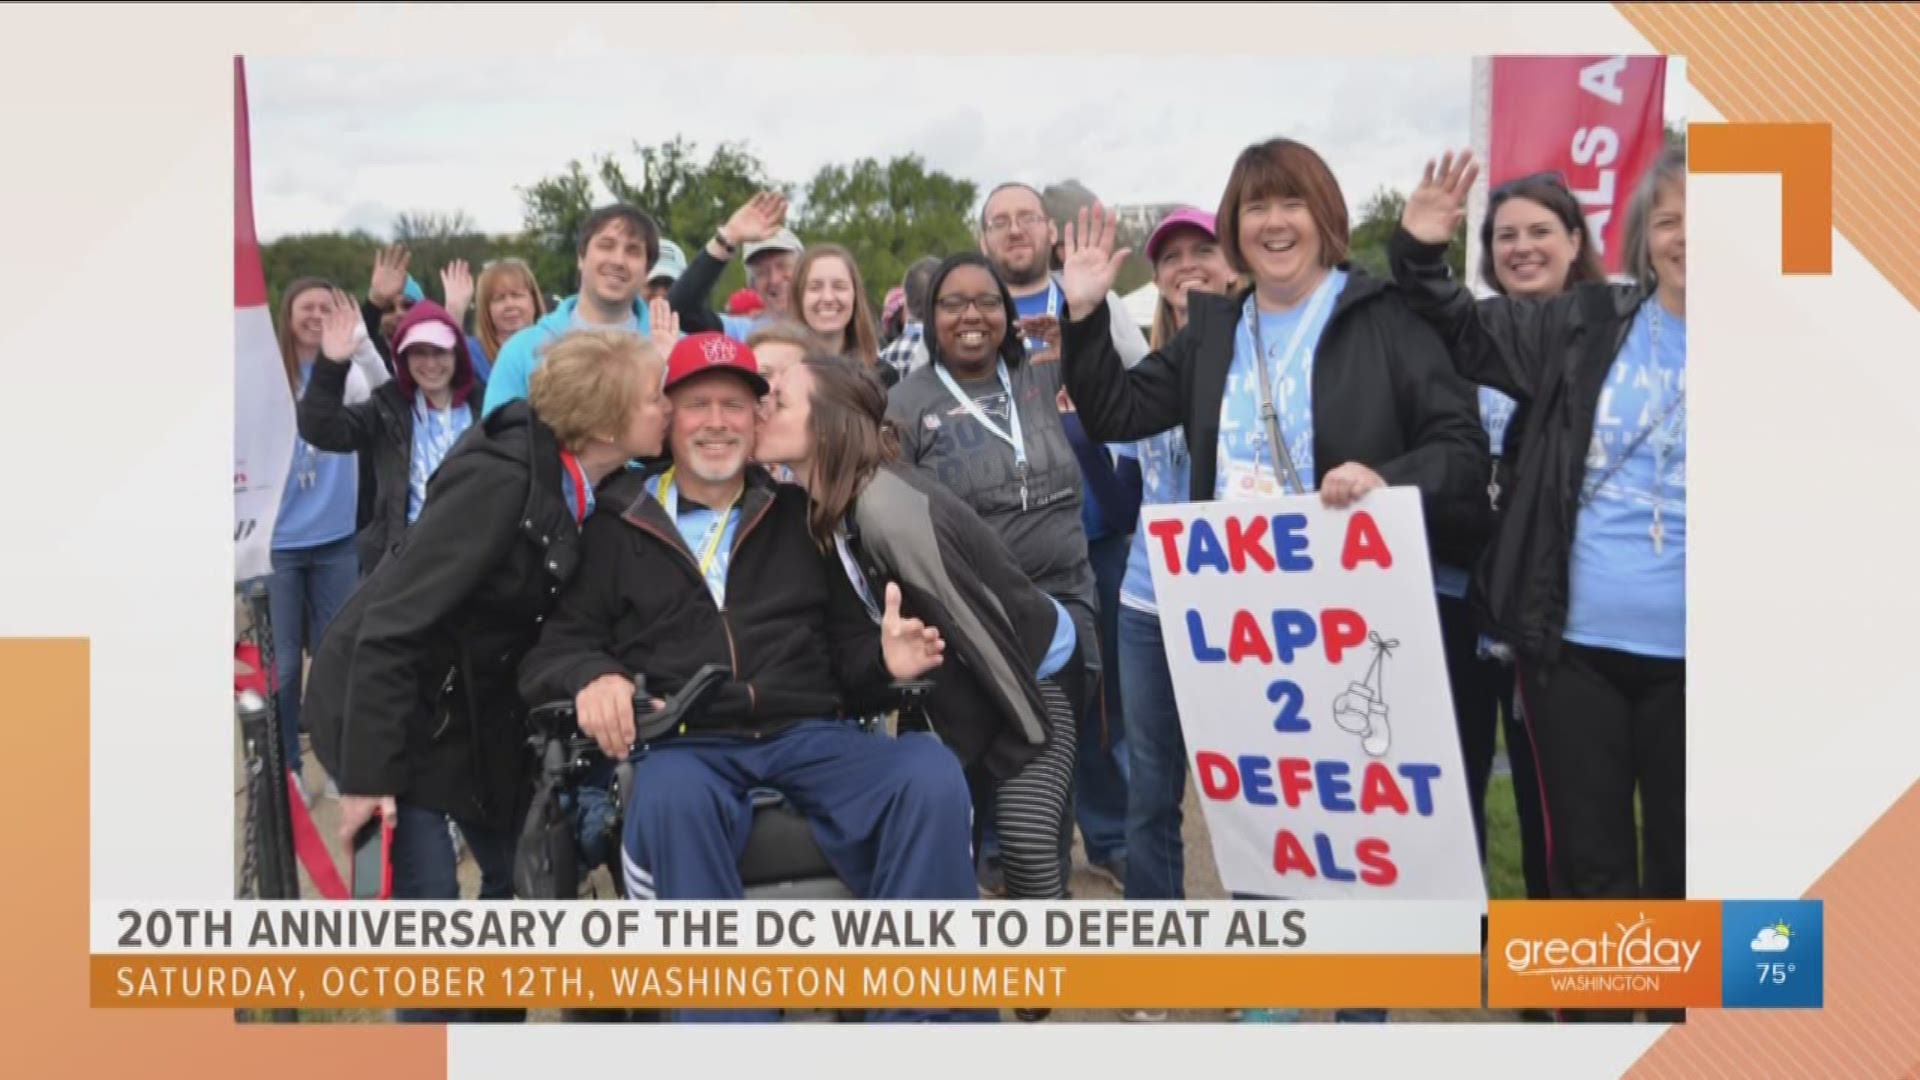 Lynn Aaronson & Tiffany Brett from theALS Association chat about the DC Walk to Defeat ALS on Oct 12, 2019. Register for the walk at walktodefeatals.org